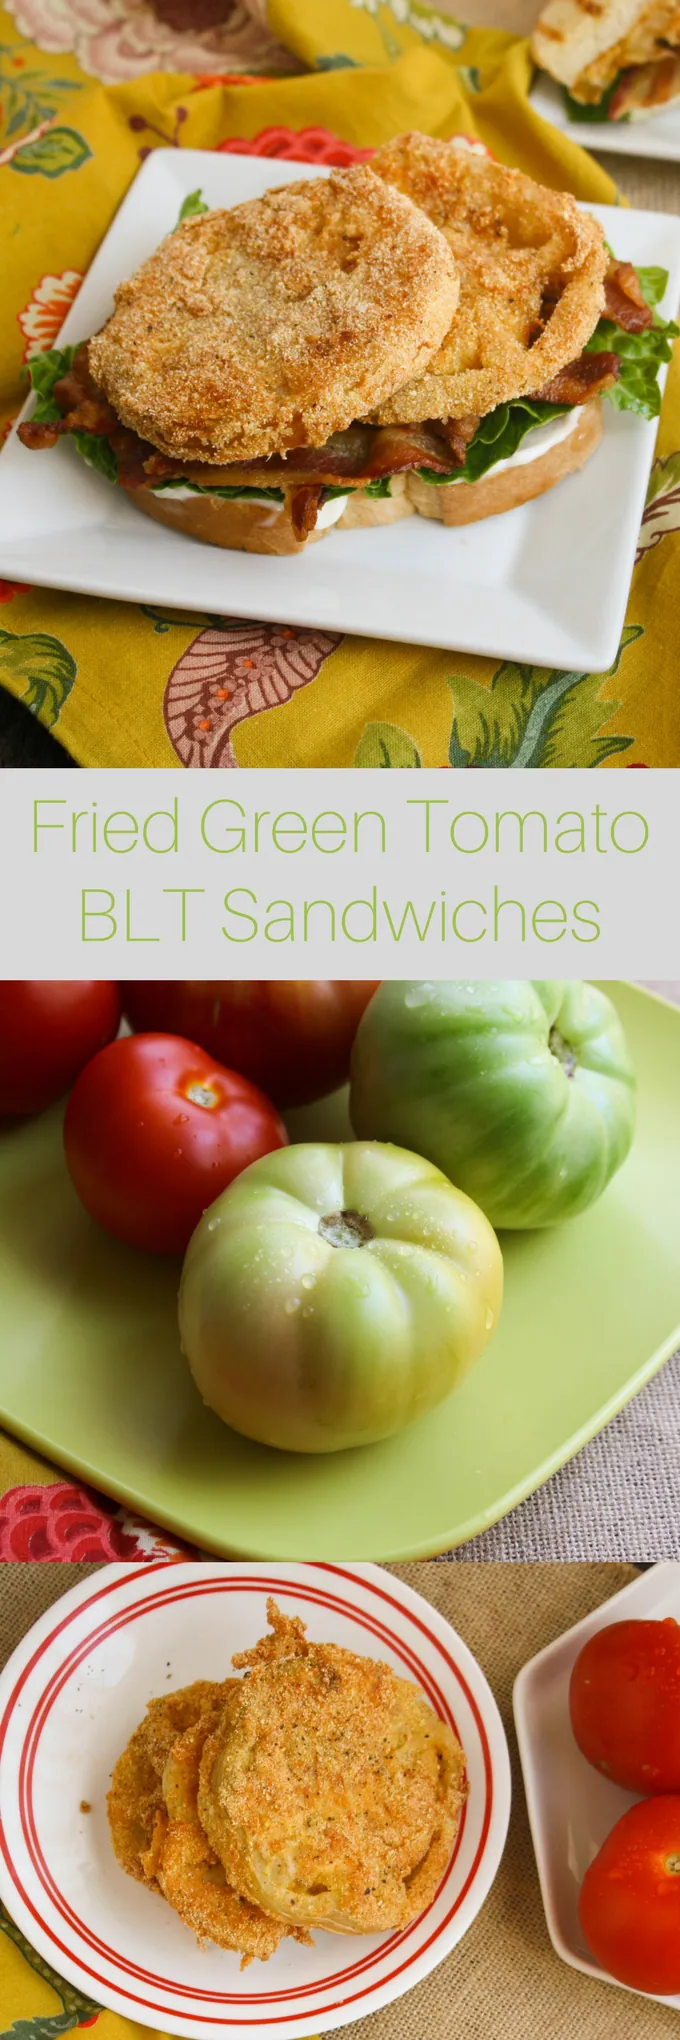 Fried Green Tomato BLT Sandwiches are a great twist on a classic. You'll love the flavors in these sandwiches, perfect for lunch or dinner!